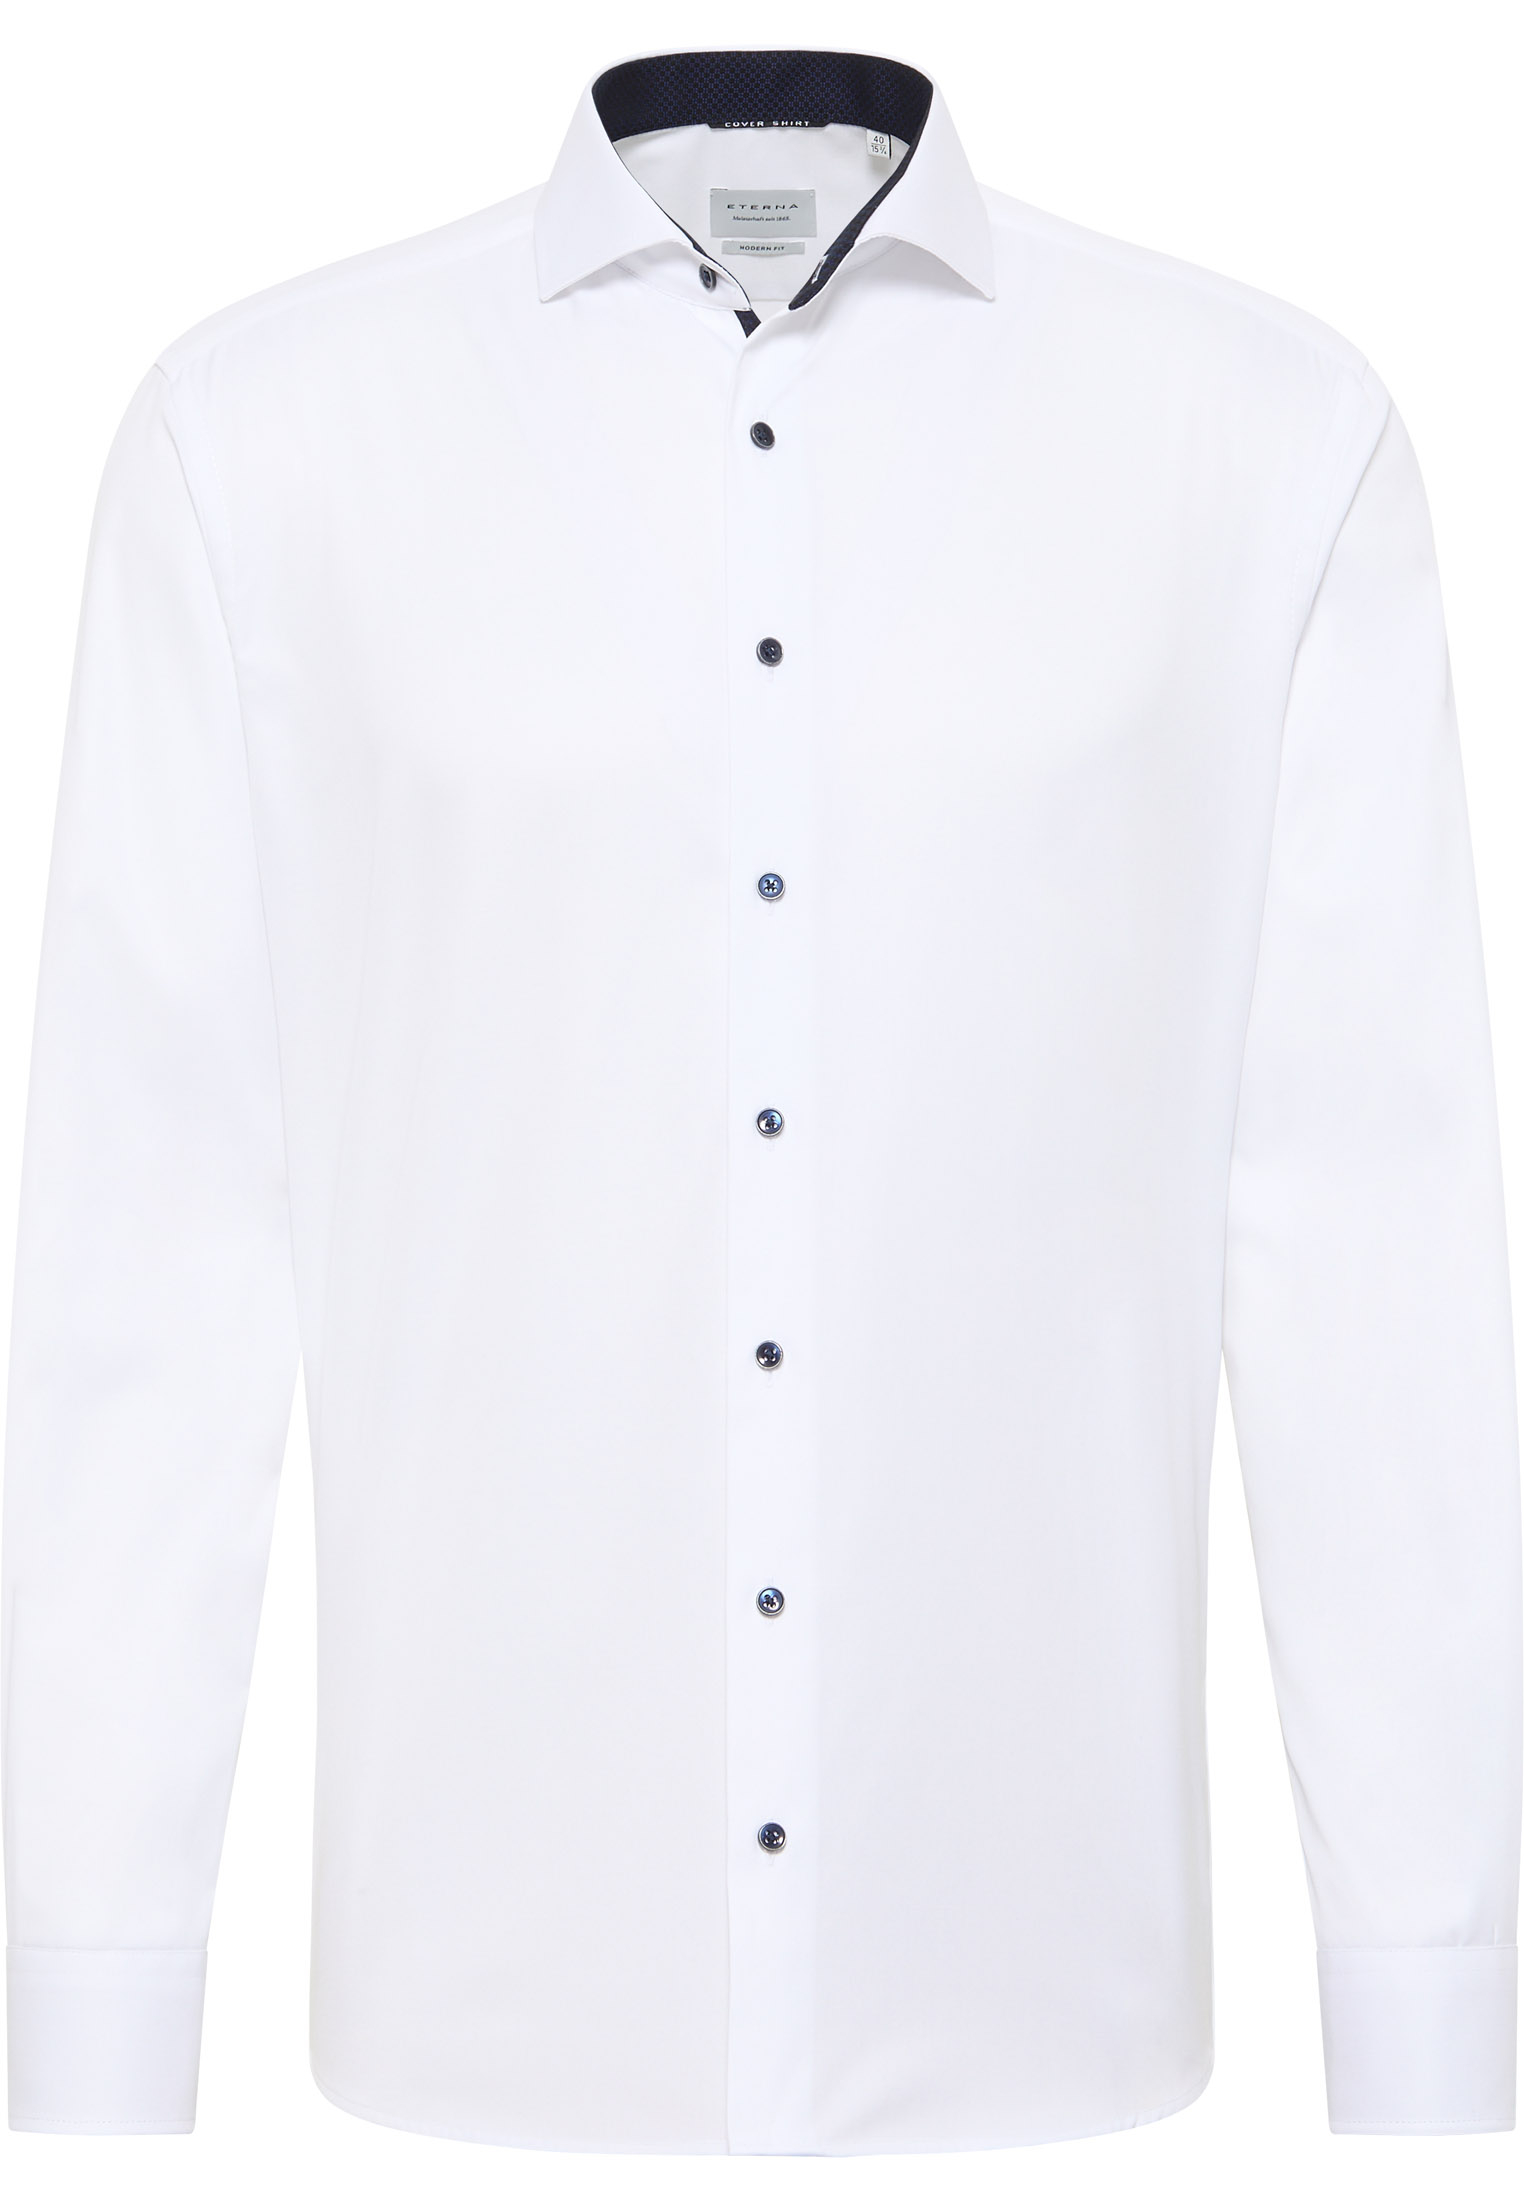 MODERN FIT Cover Shirt in wit vlakte